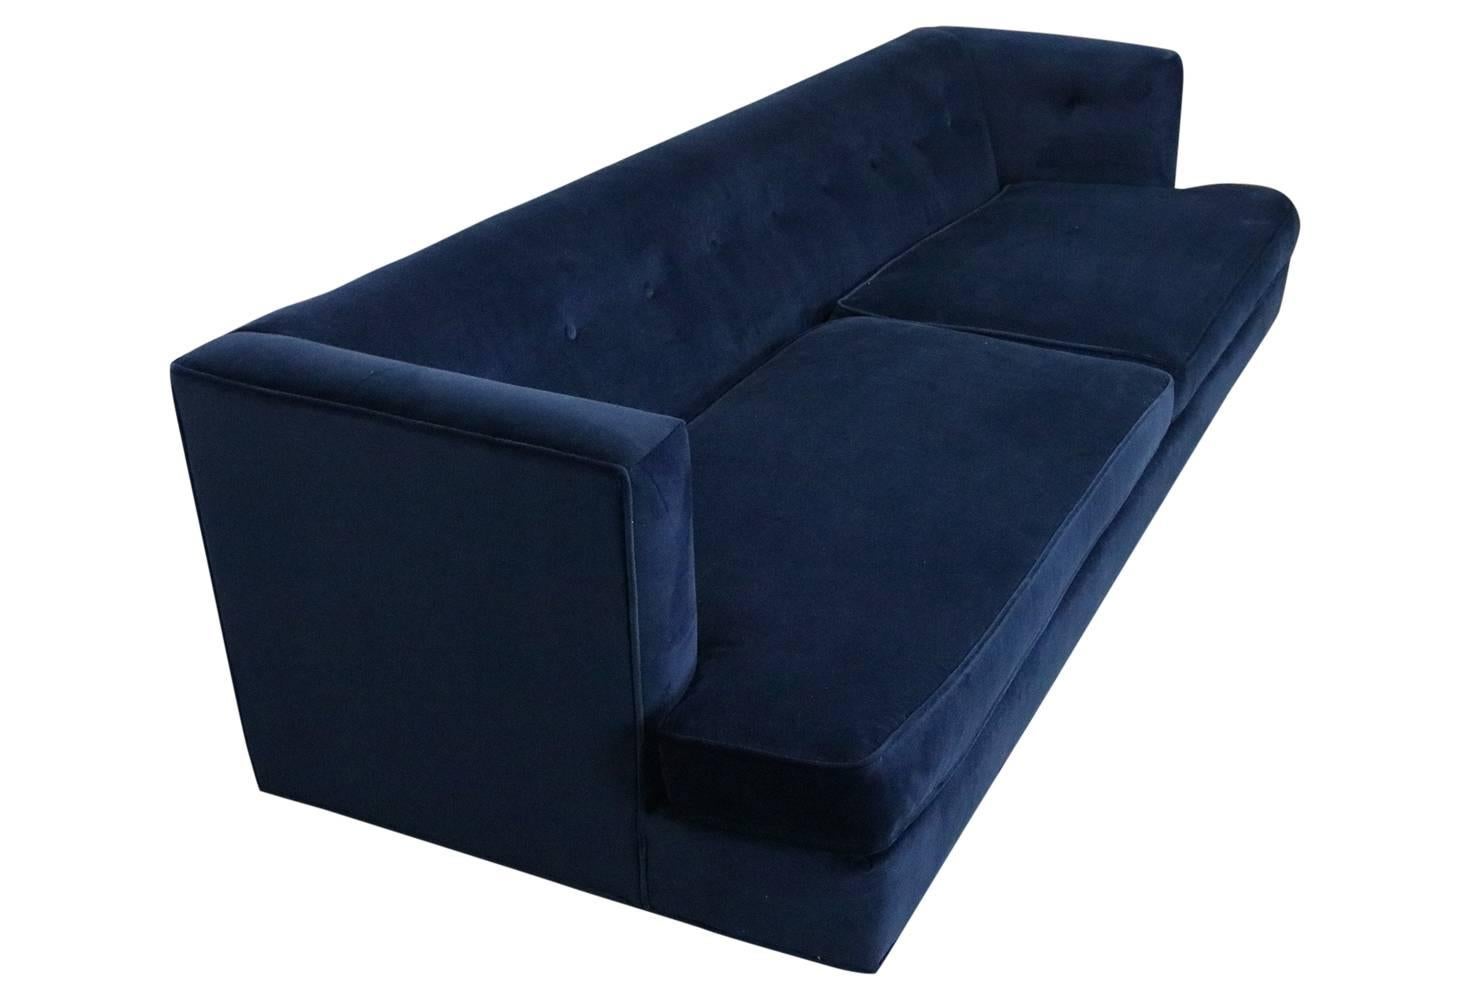 Long and lean and fully restored, this gorgeous sofa is covered in a soft navy blue velvet and has rich walnut legs.